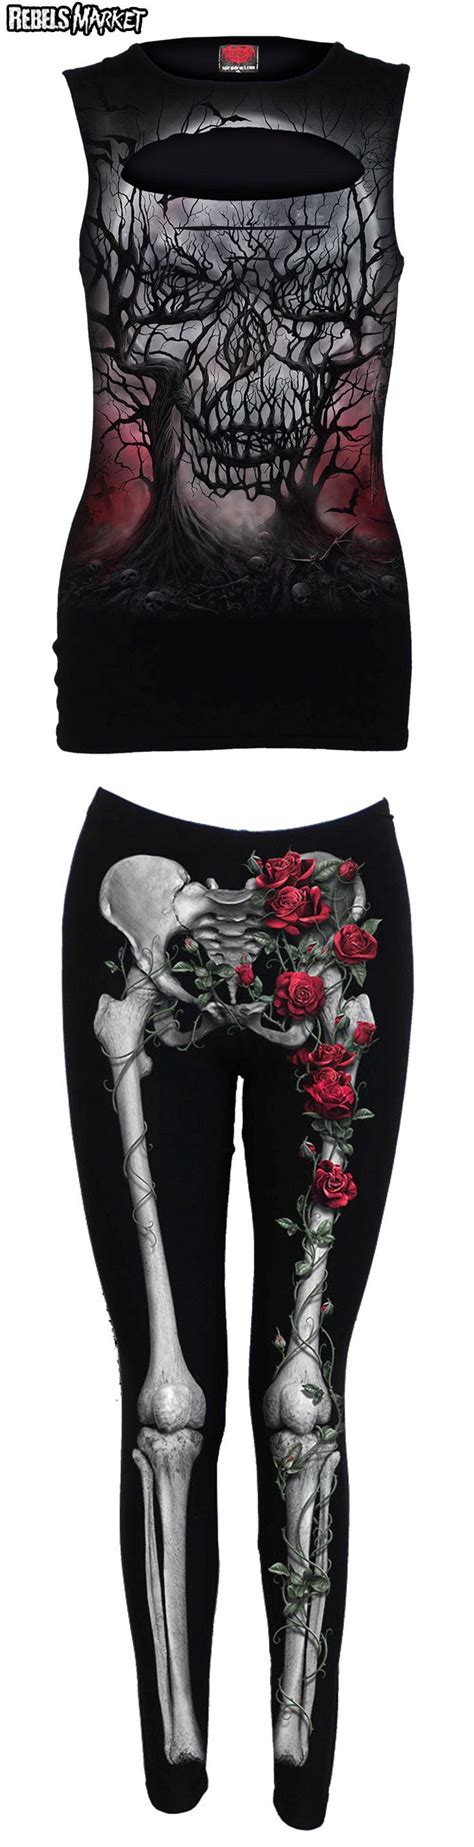 Shop Skull Goth Tops And Leggings At Rebelsmarket Gothic Fashion